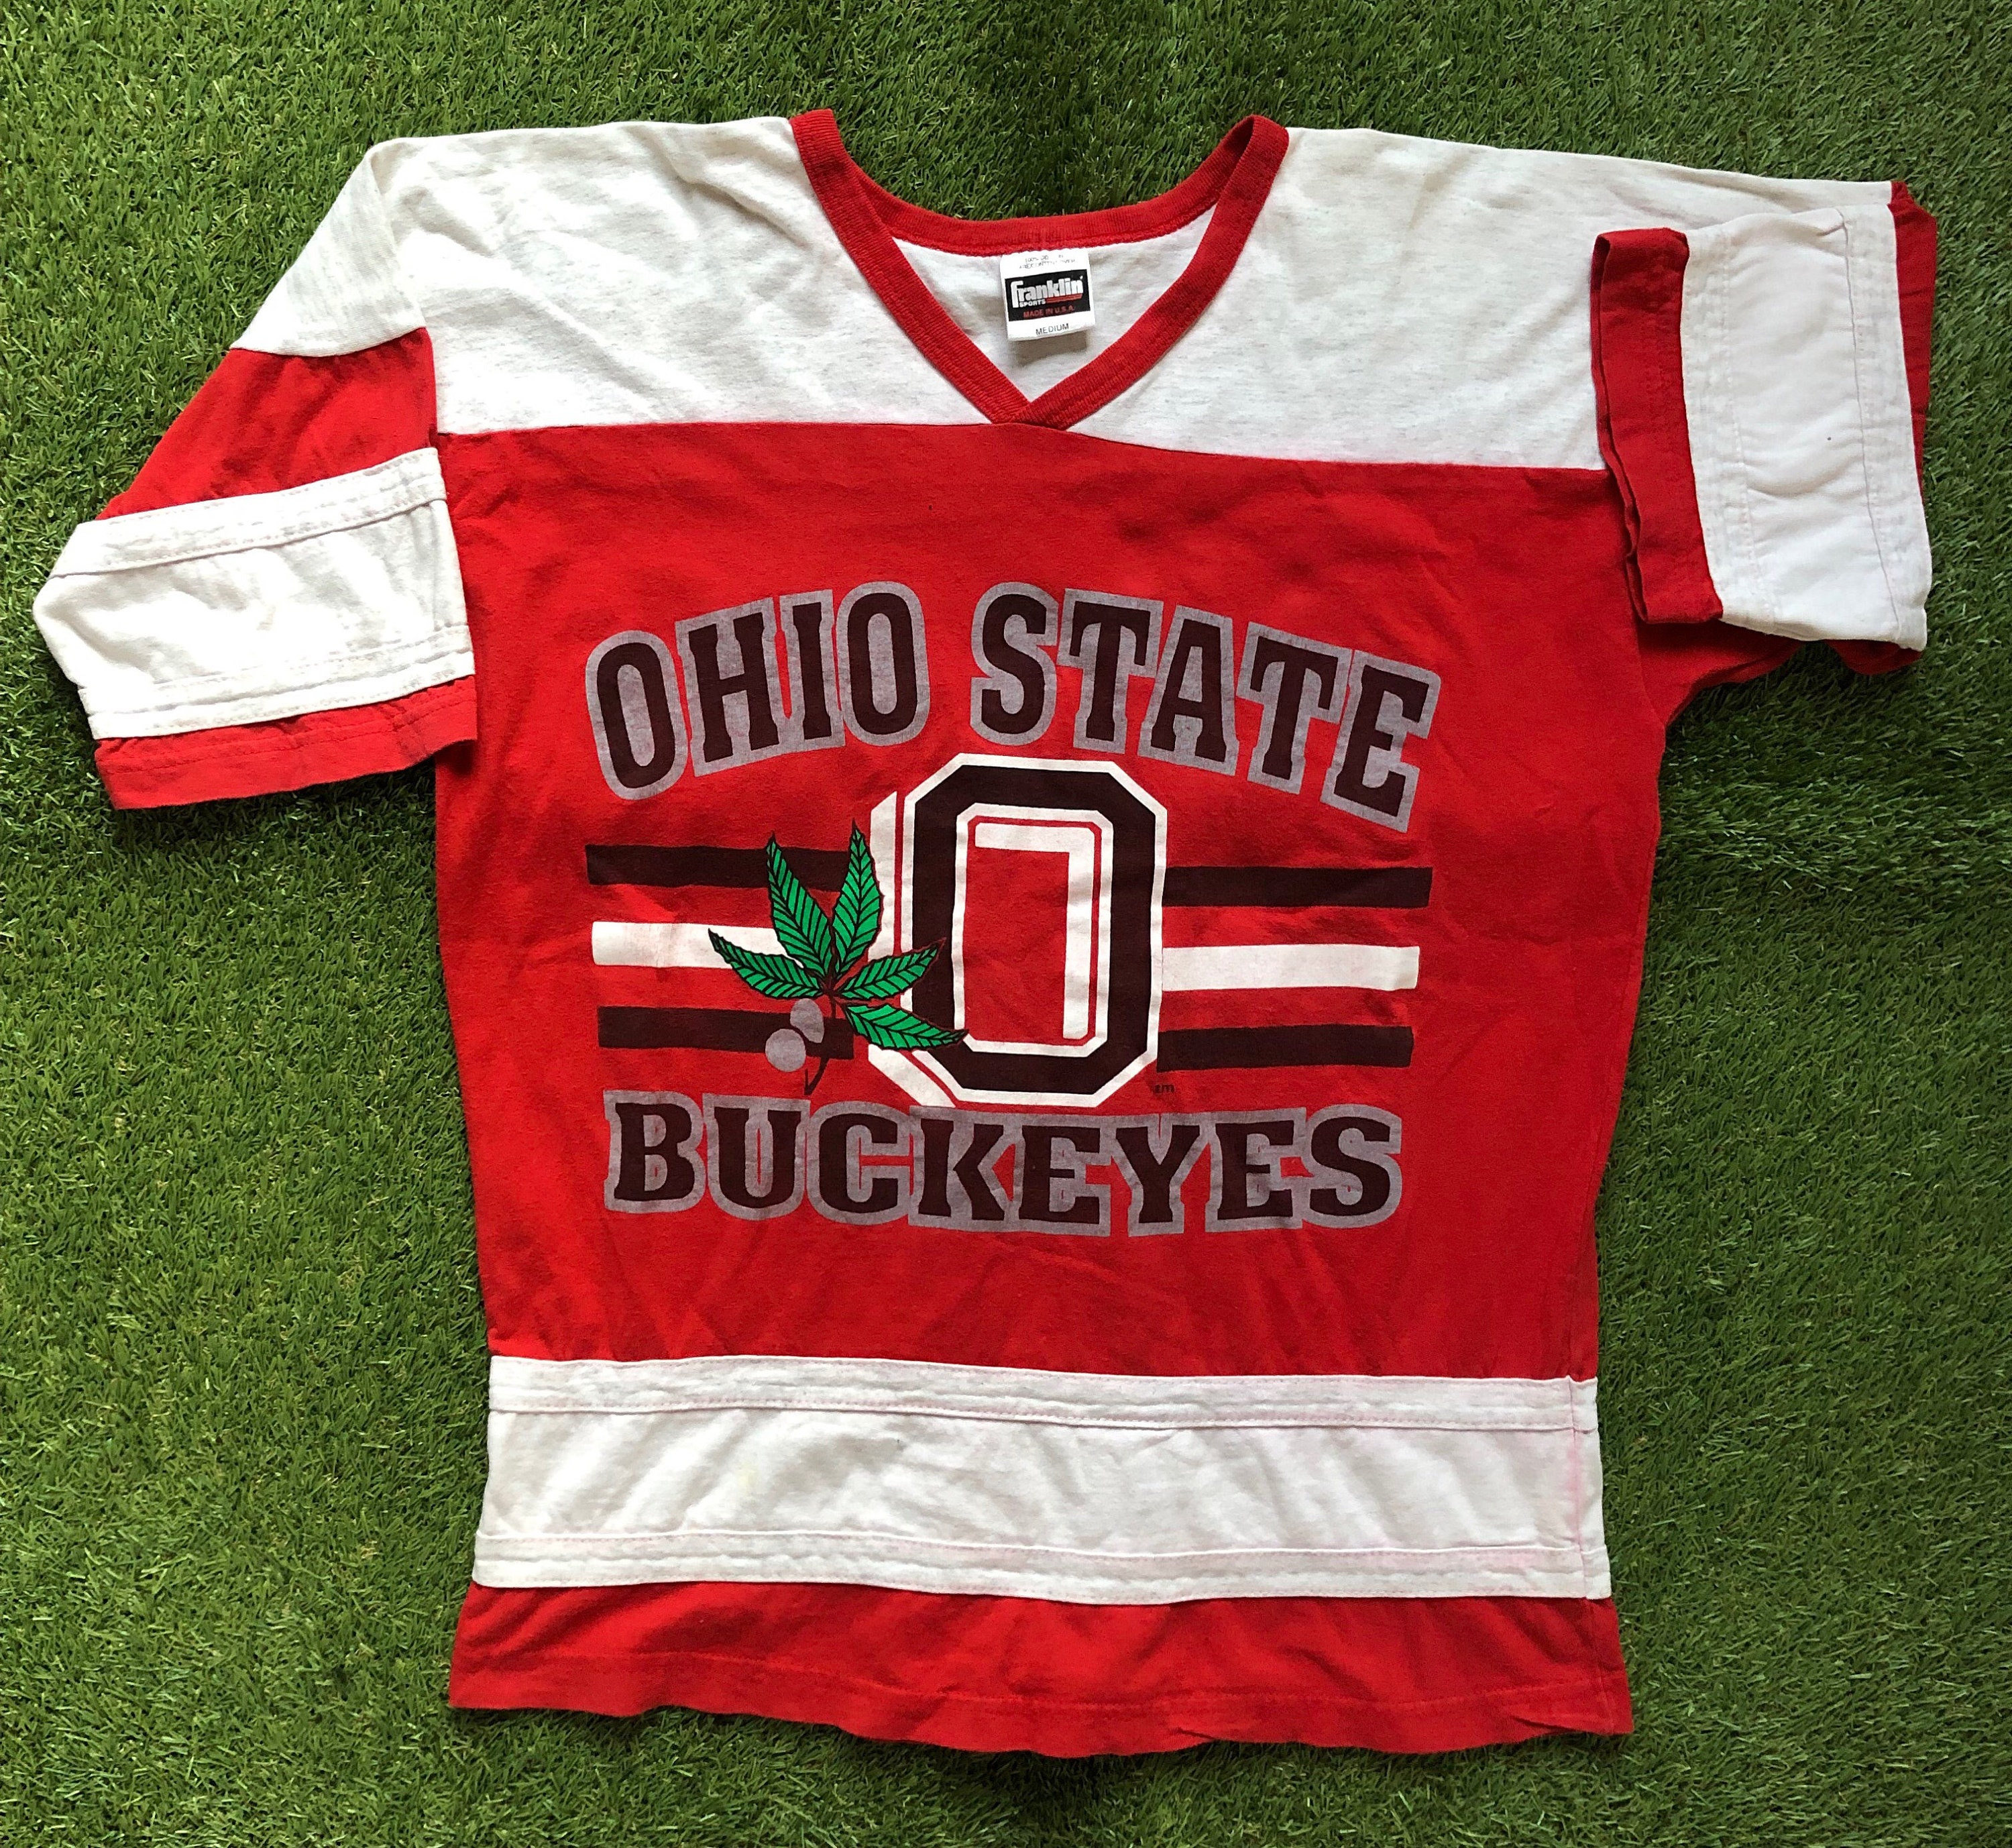 Music & Cannon Fire: Ohio State Football 1916 Throwback Jerseys Now on Sale